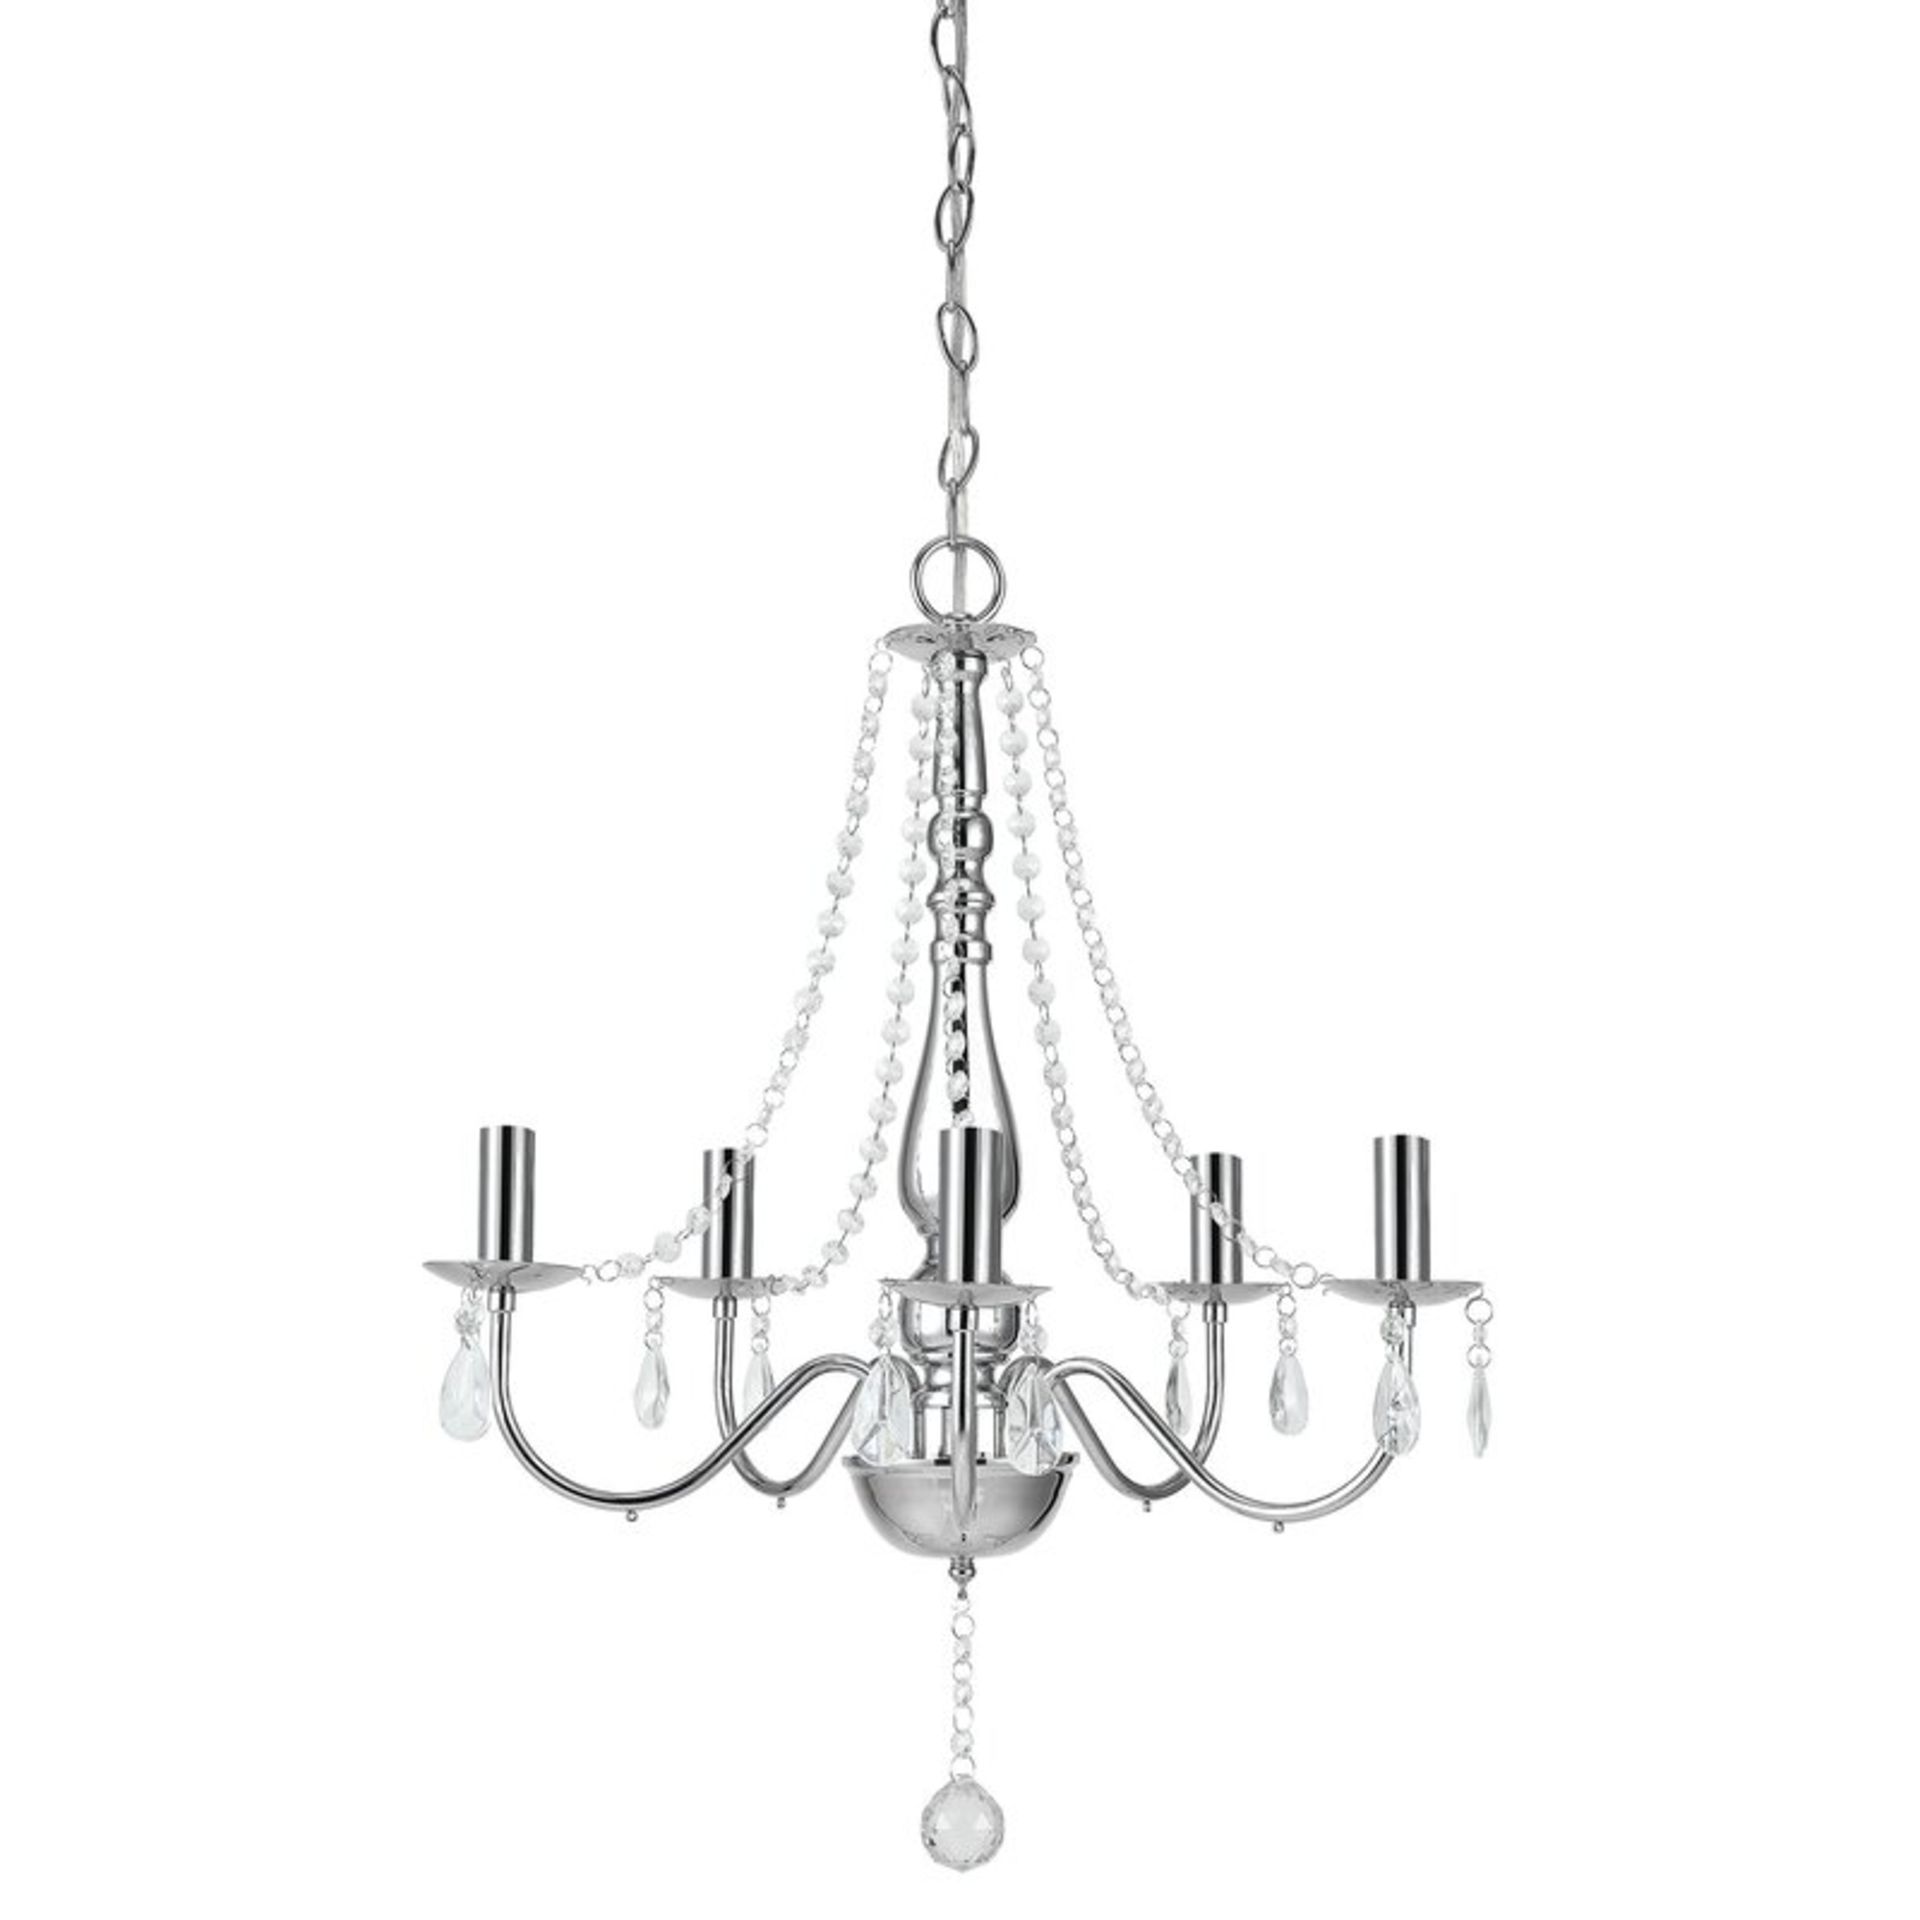 Kempsford 5-Light Candle Style Chandelie